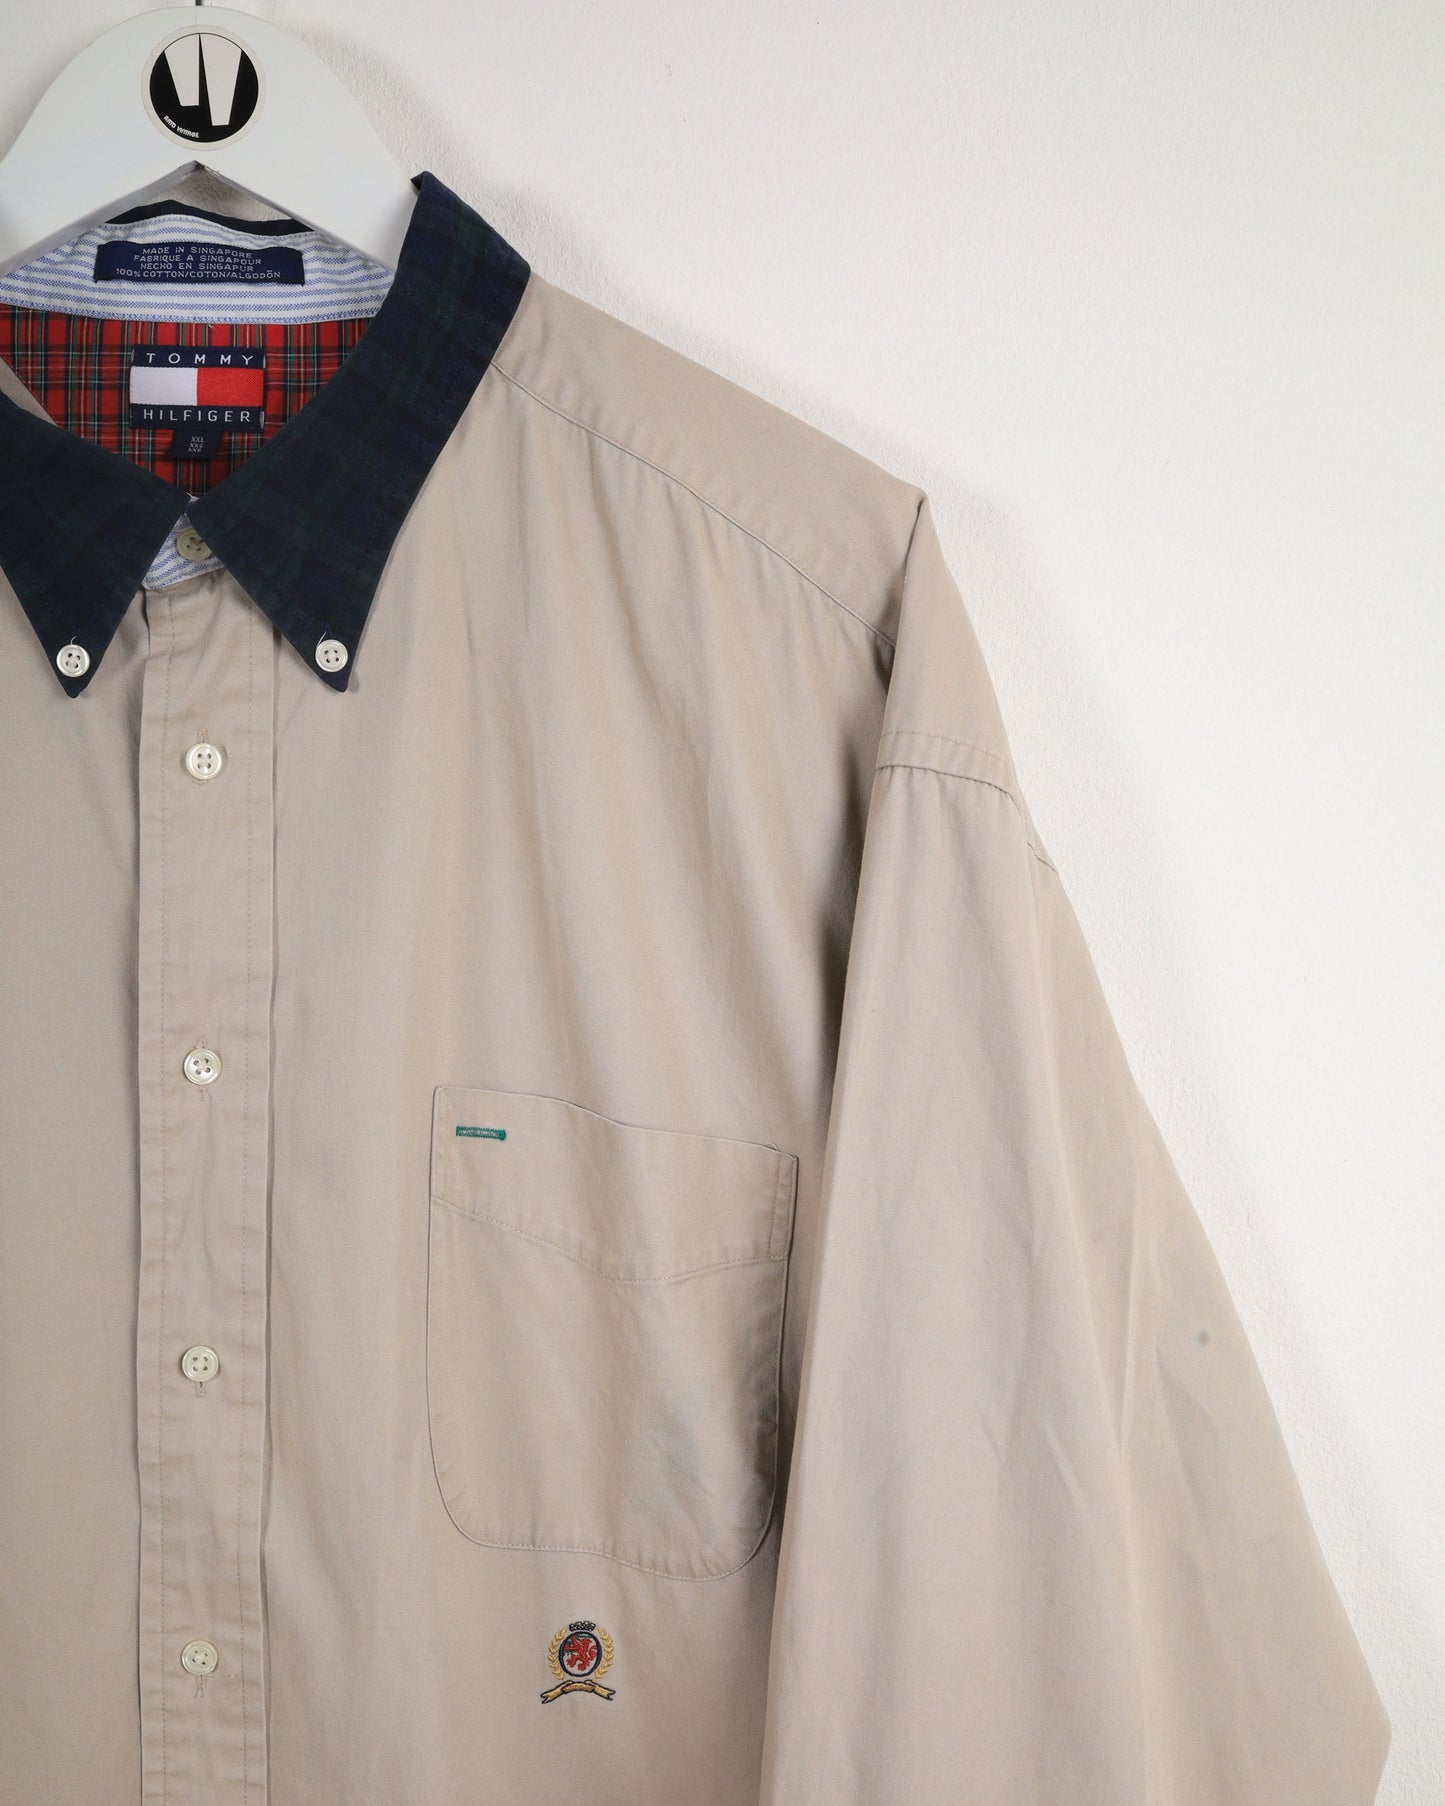 Vintage Tommy Hilfiger Button Down Long Sleeve Shirt